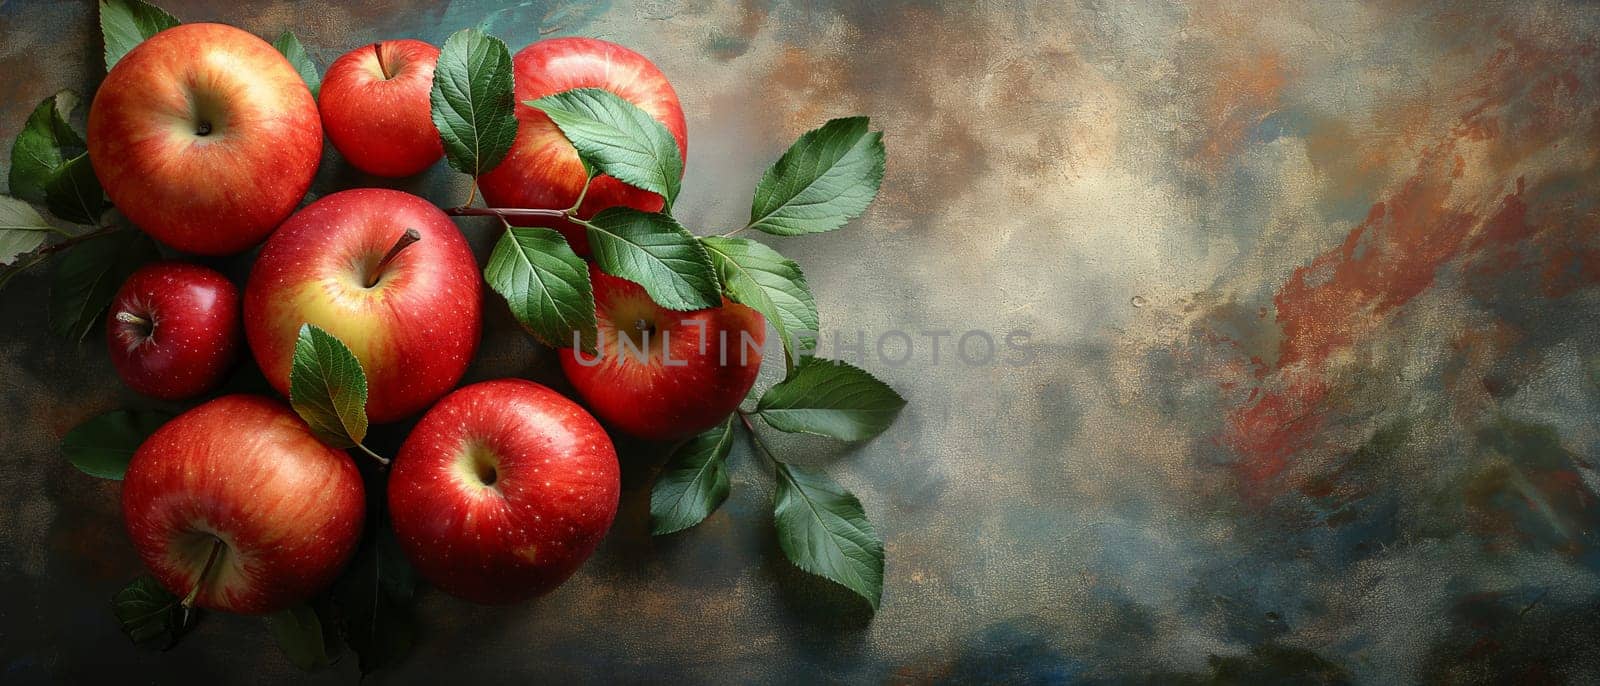 Still life painting featuring red apples with green leaves.